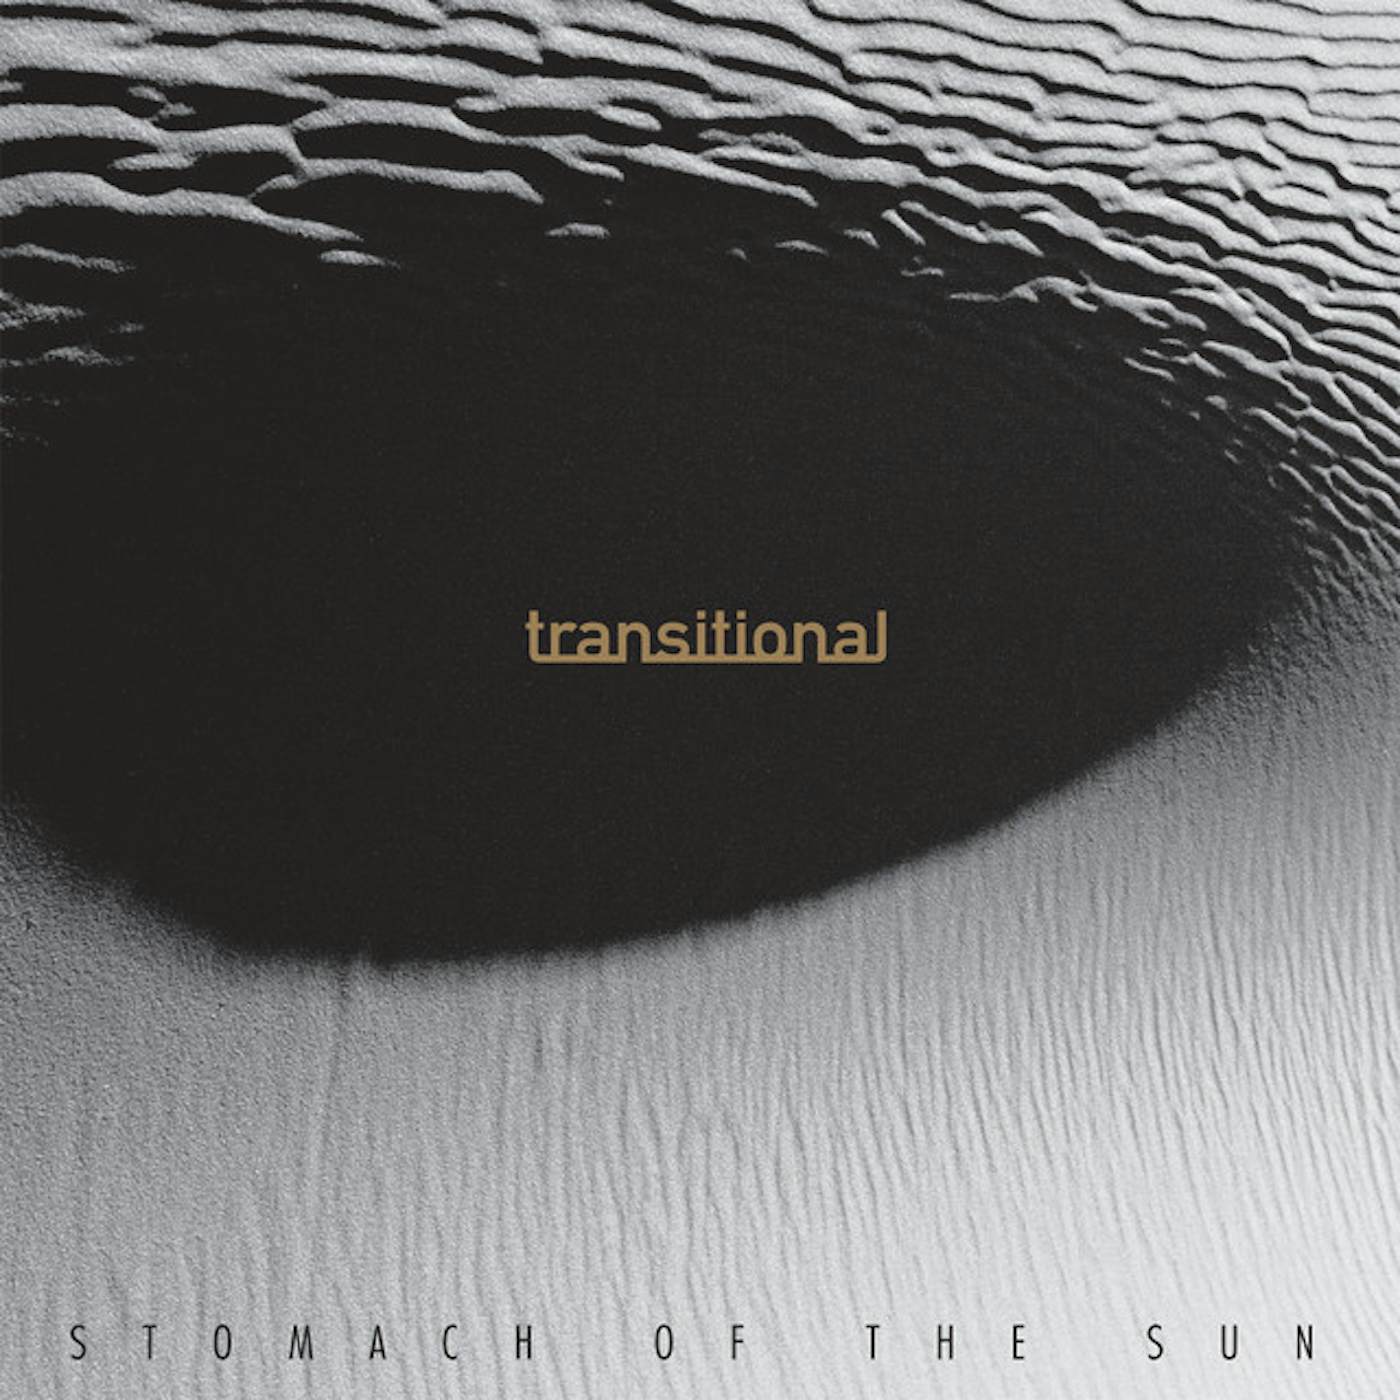 Transitional Stomach Of The Sun Vinyl Record